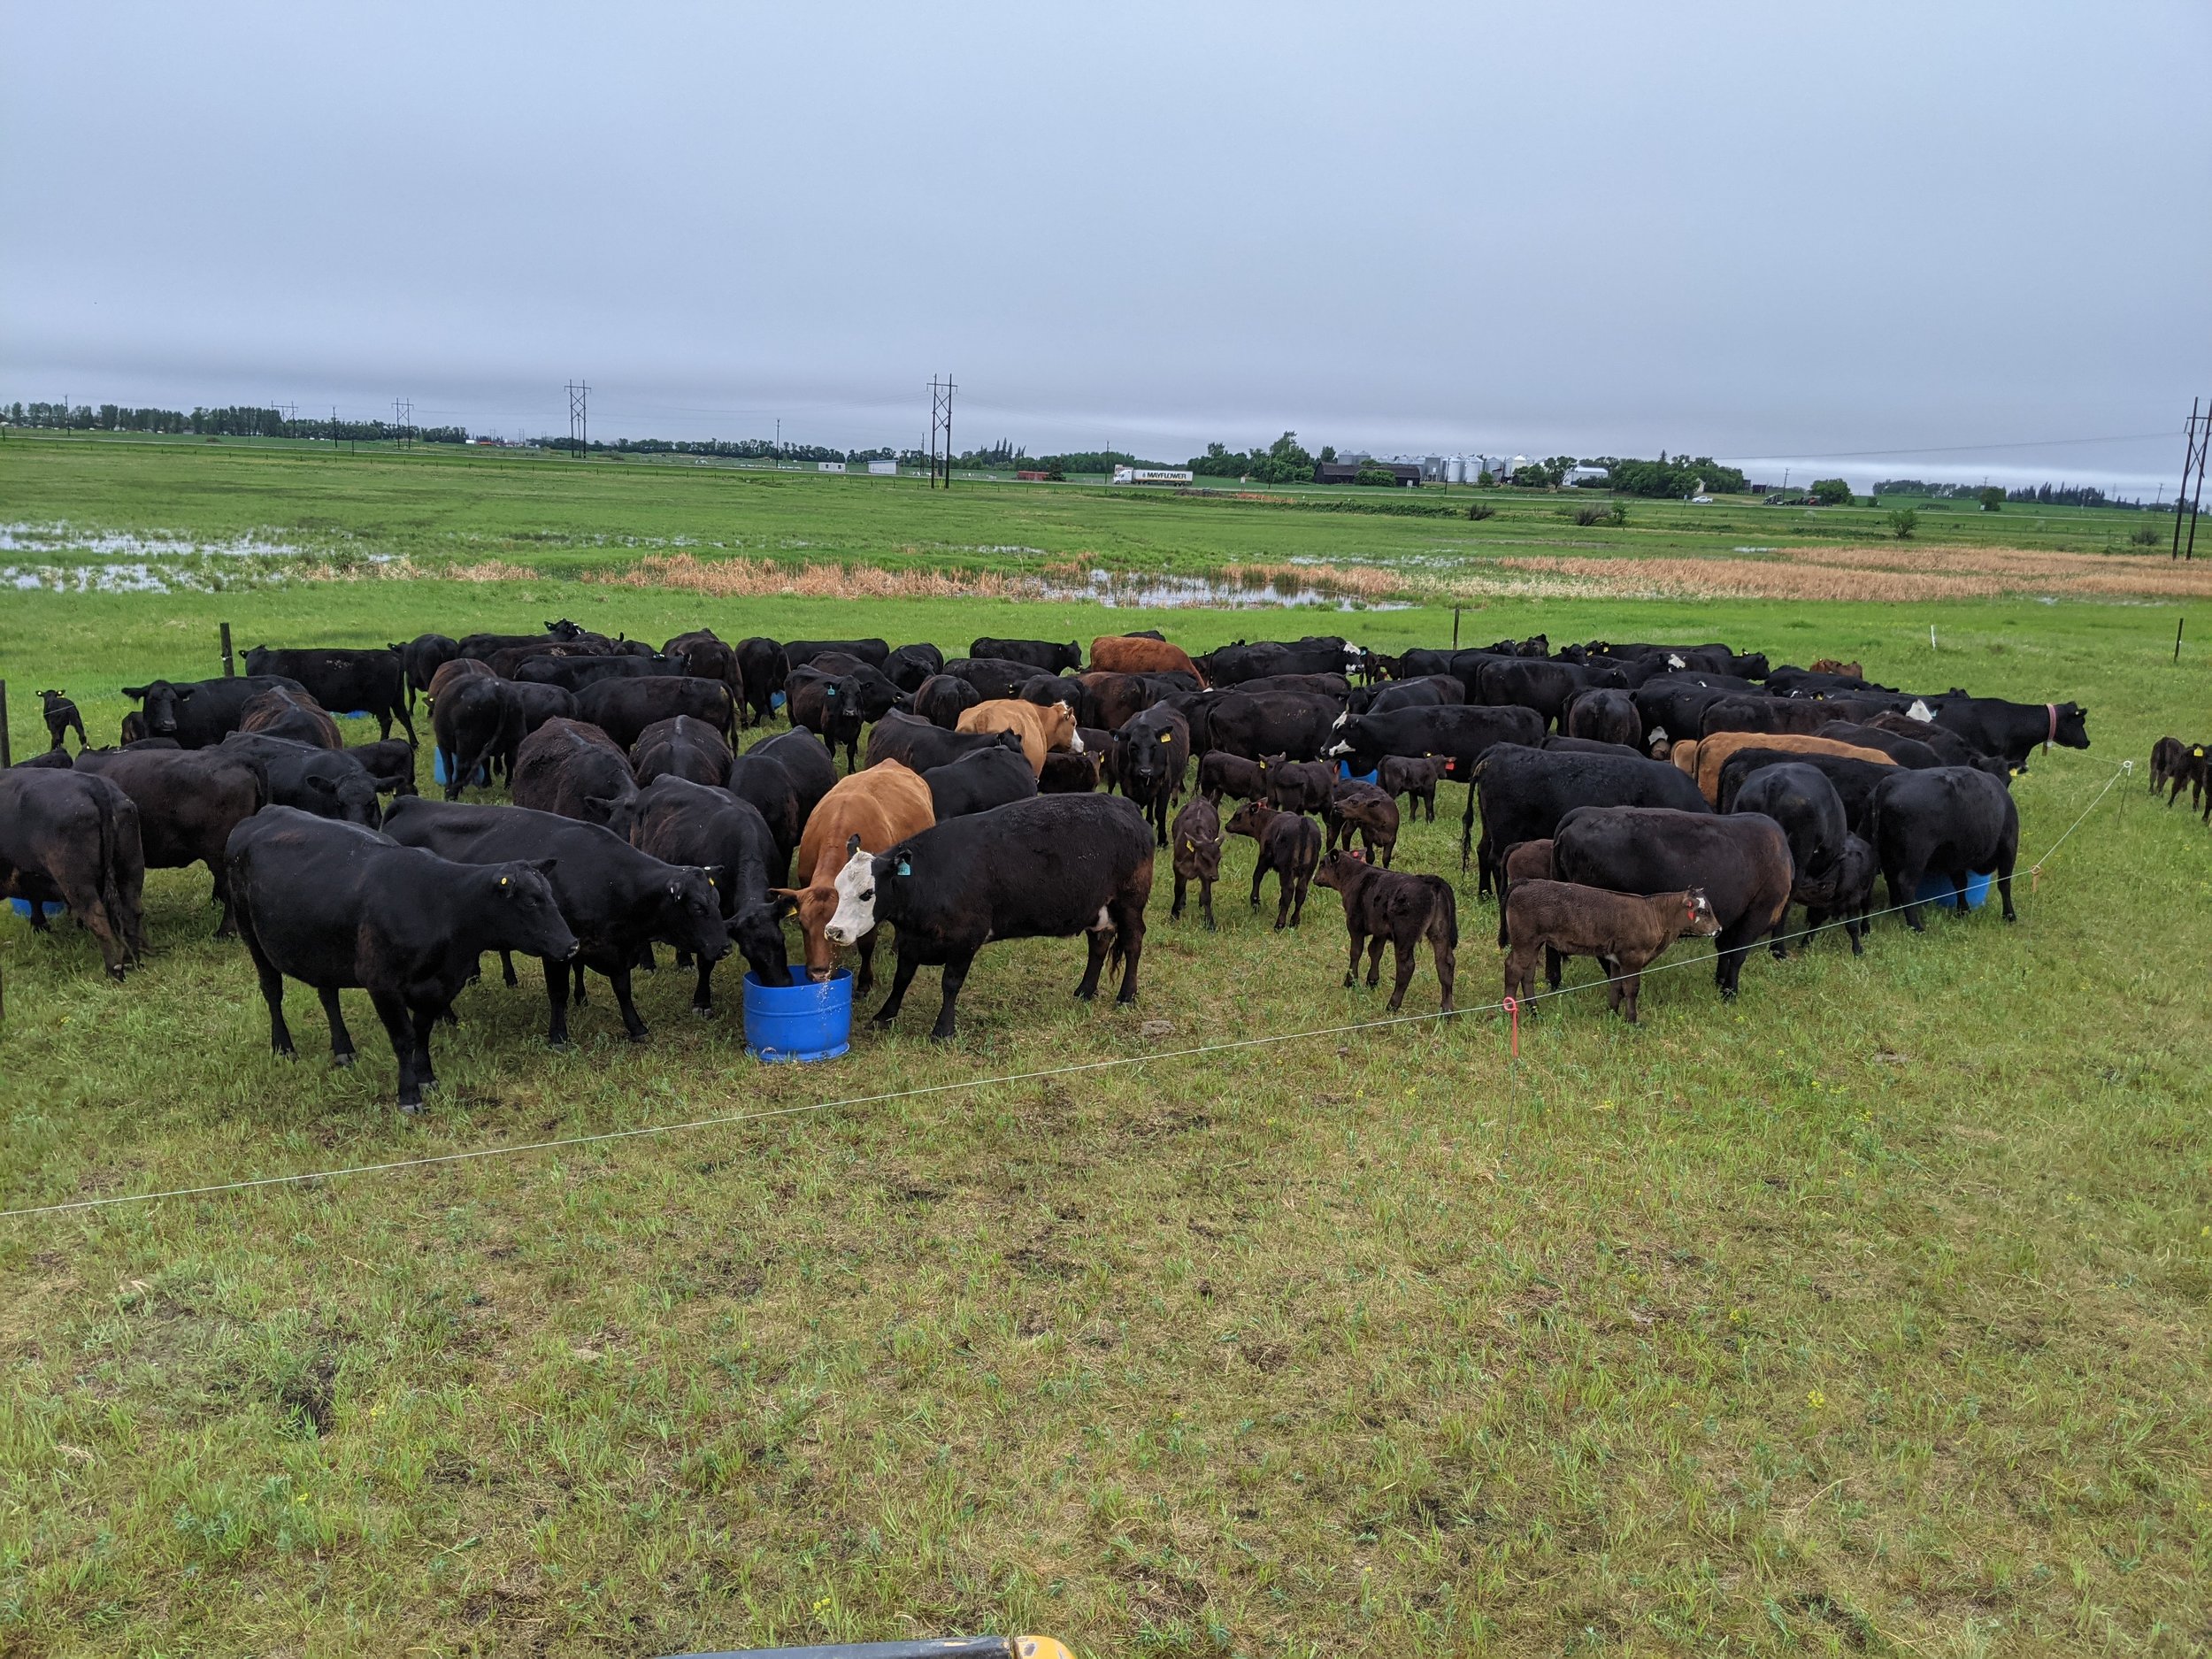 Cows gathered for training in eating leafy spurge